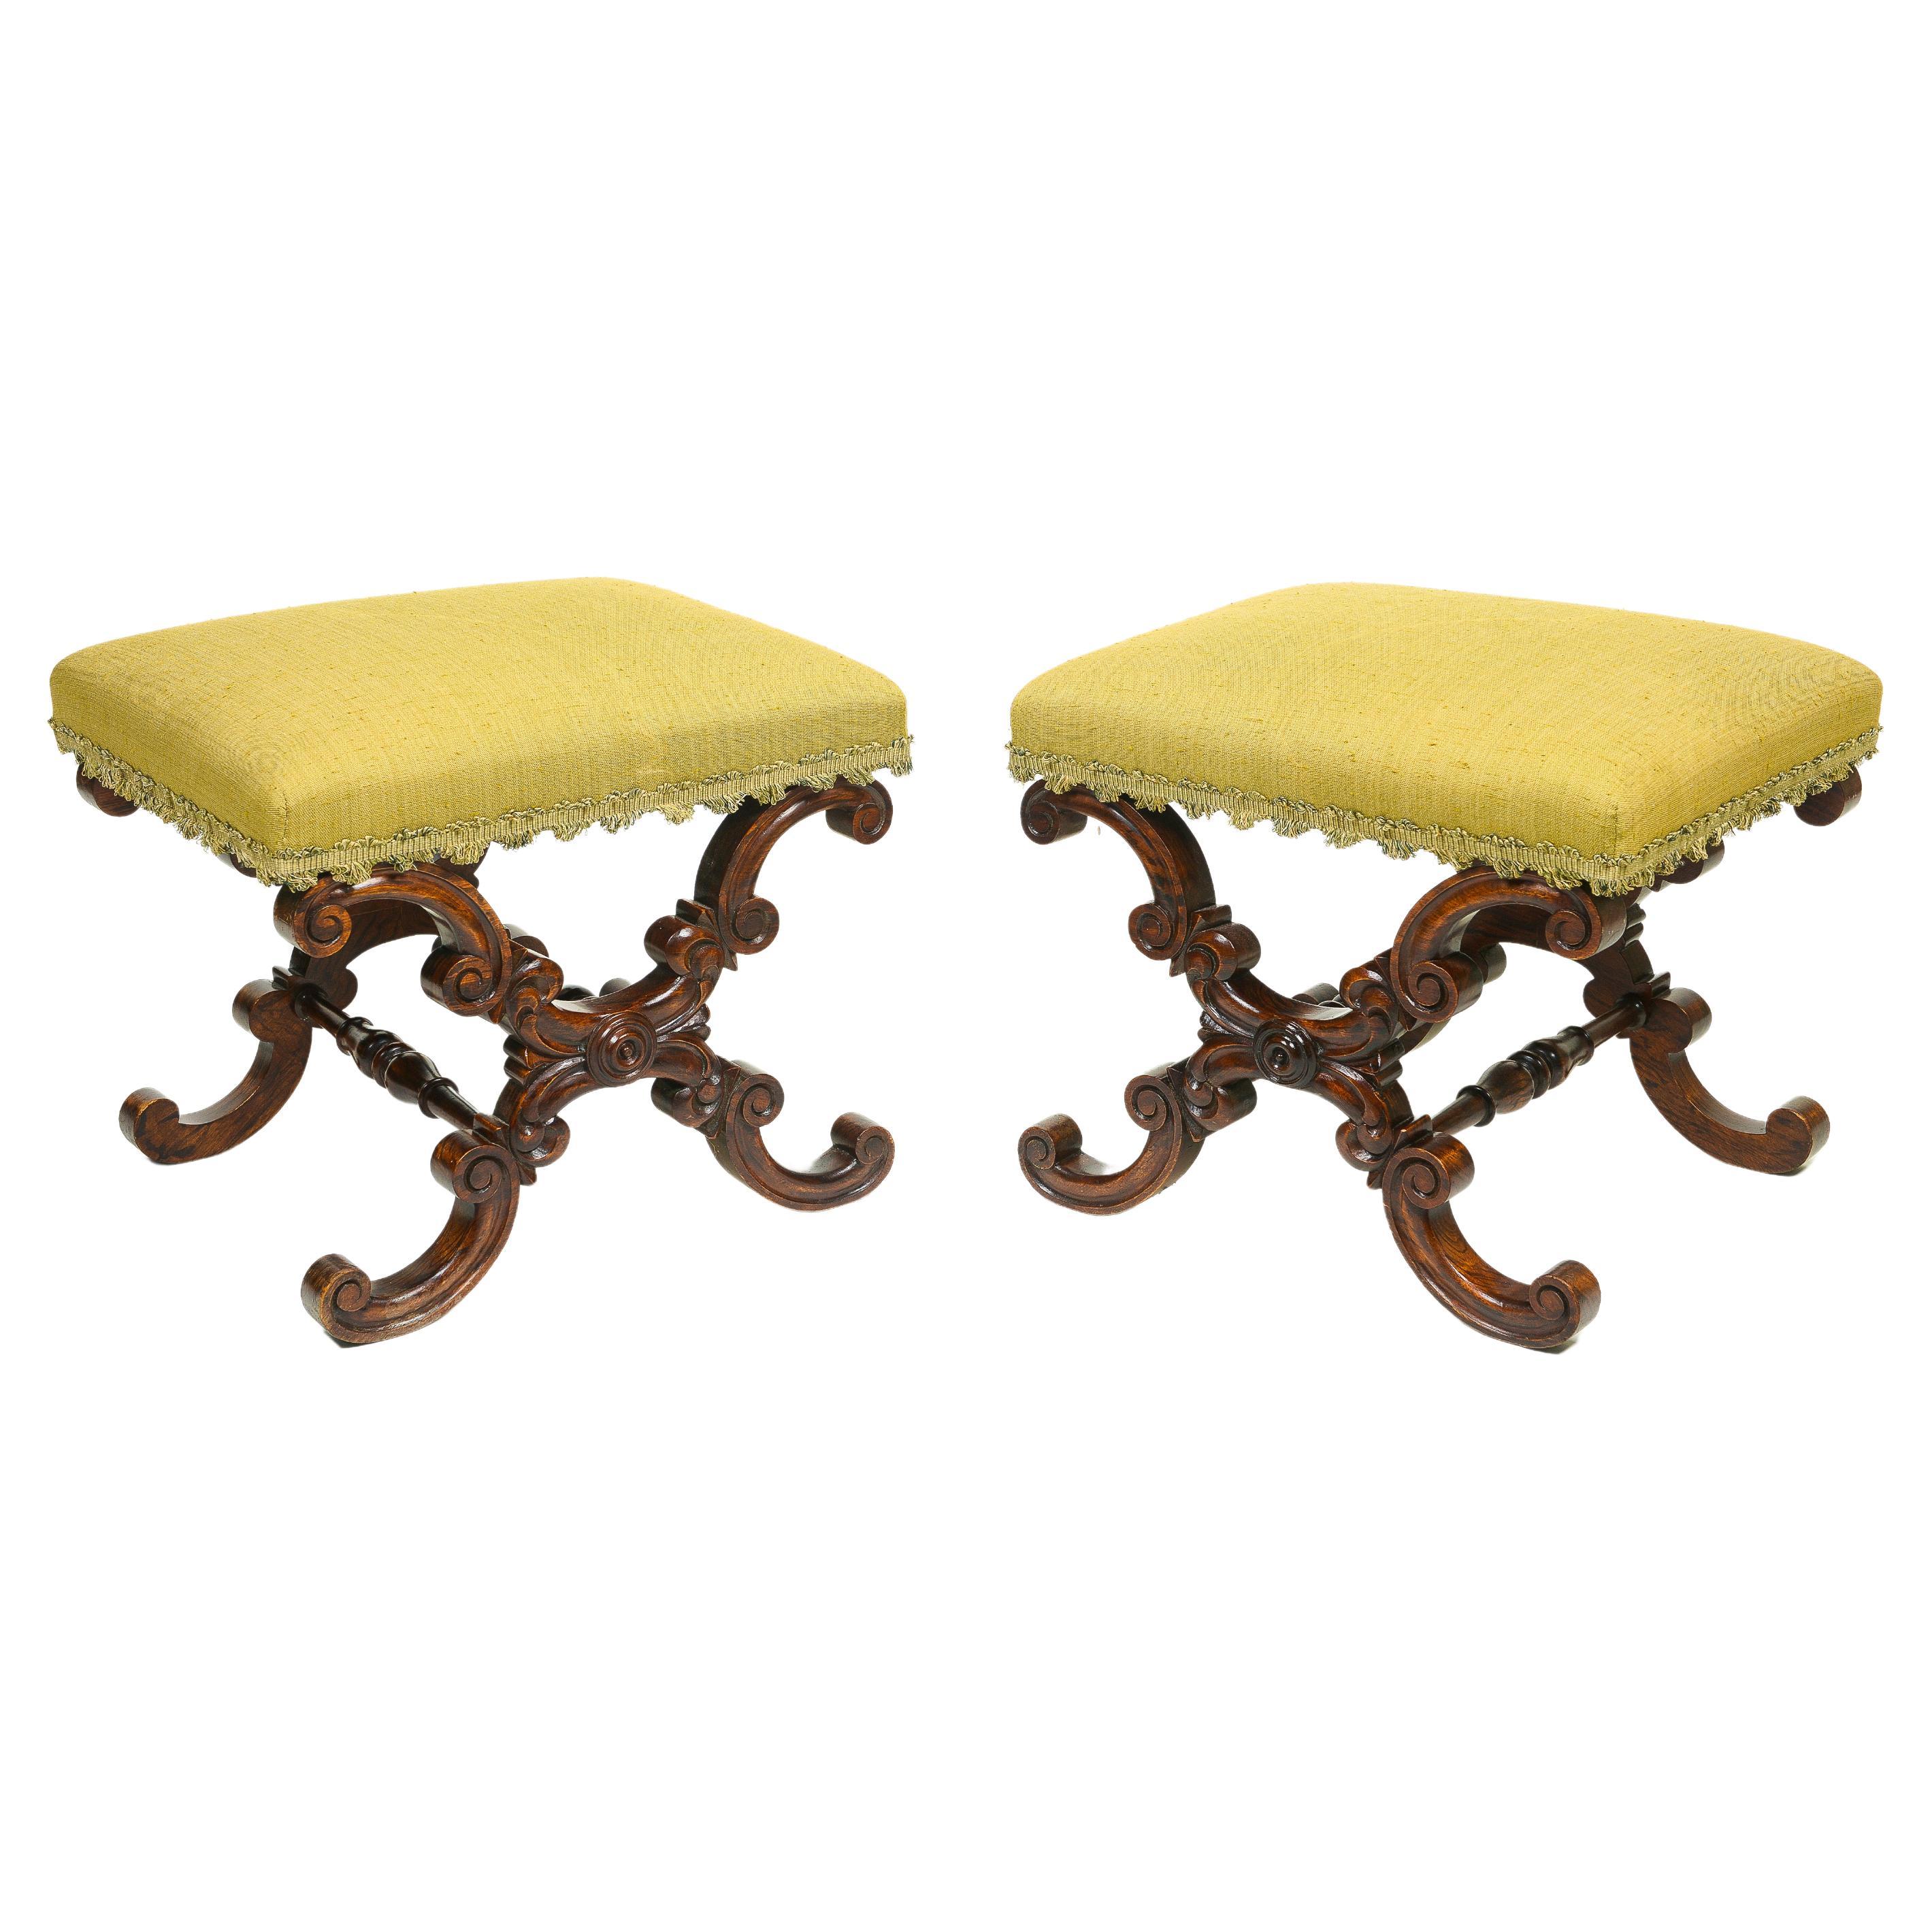 A Pair of Fine William IV Rosewood Benches For Sale